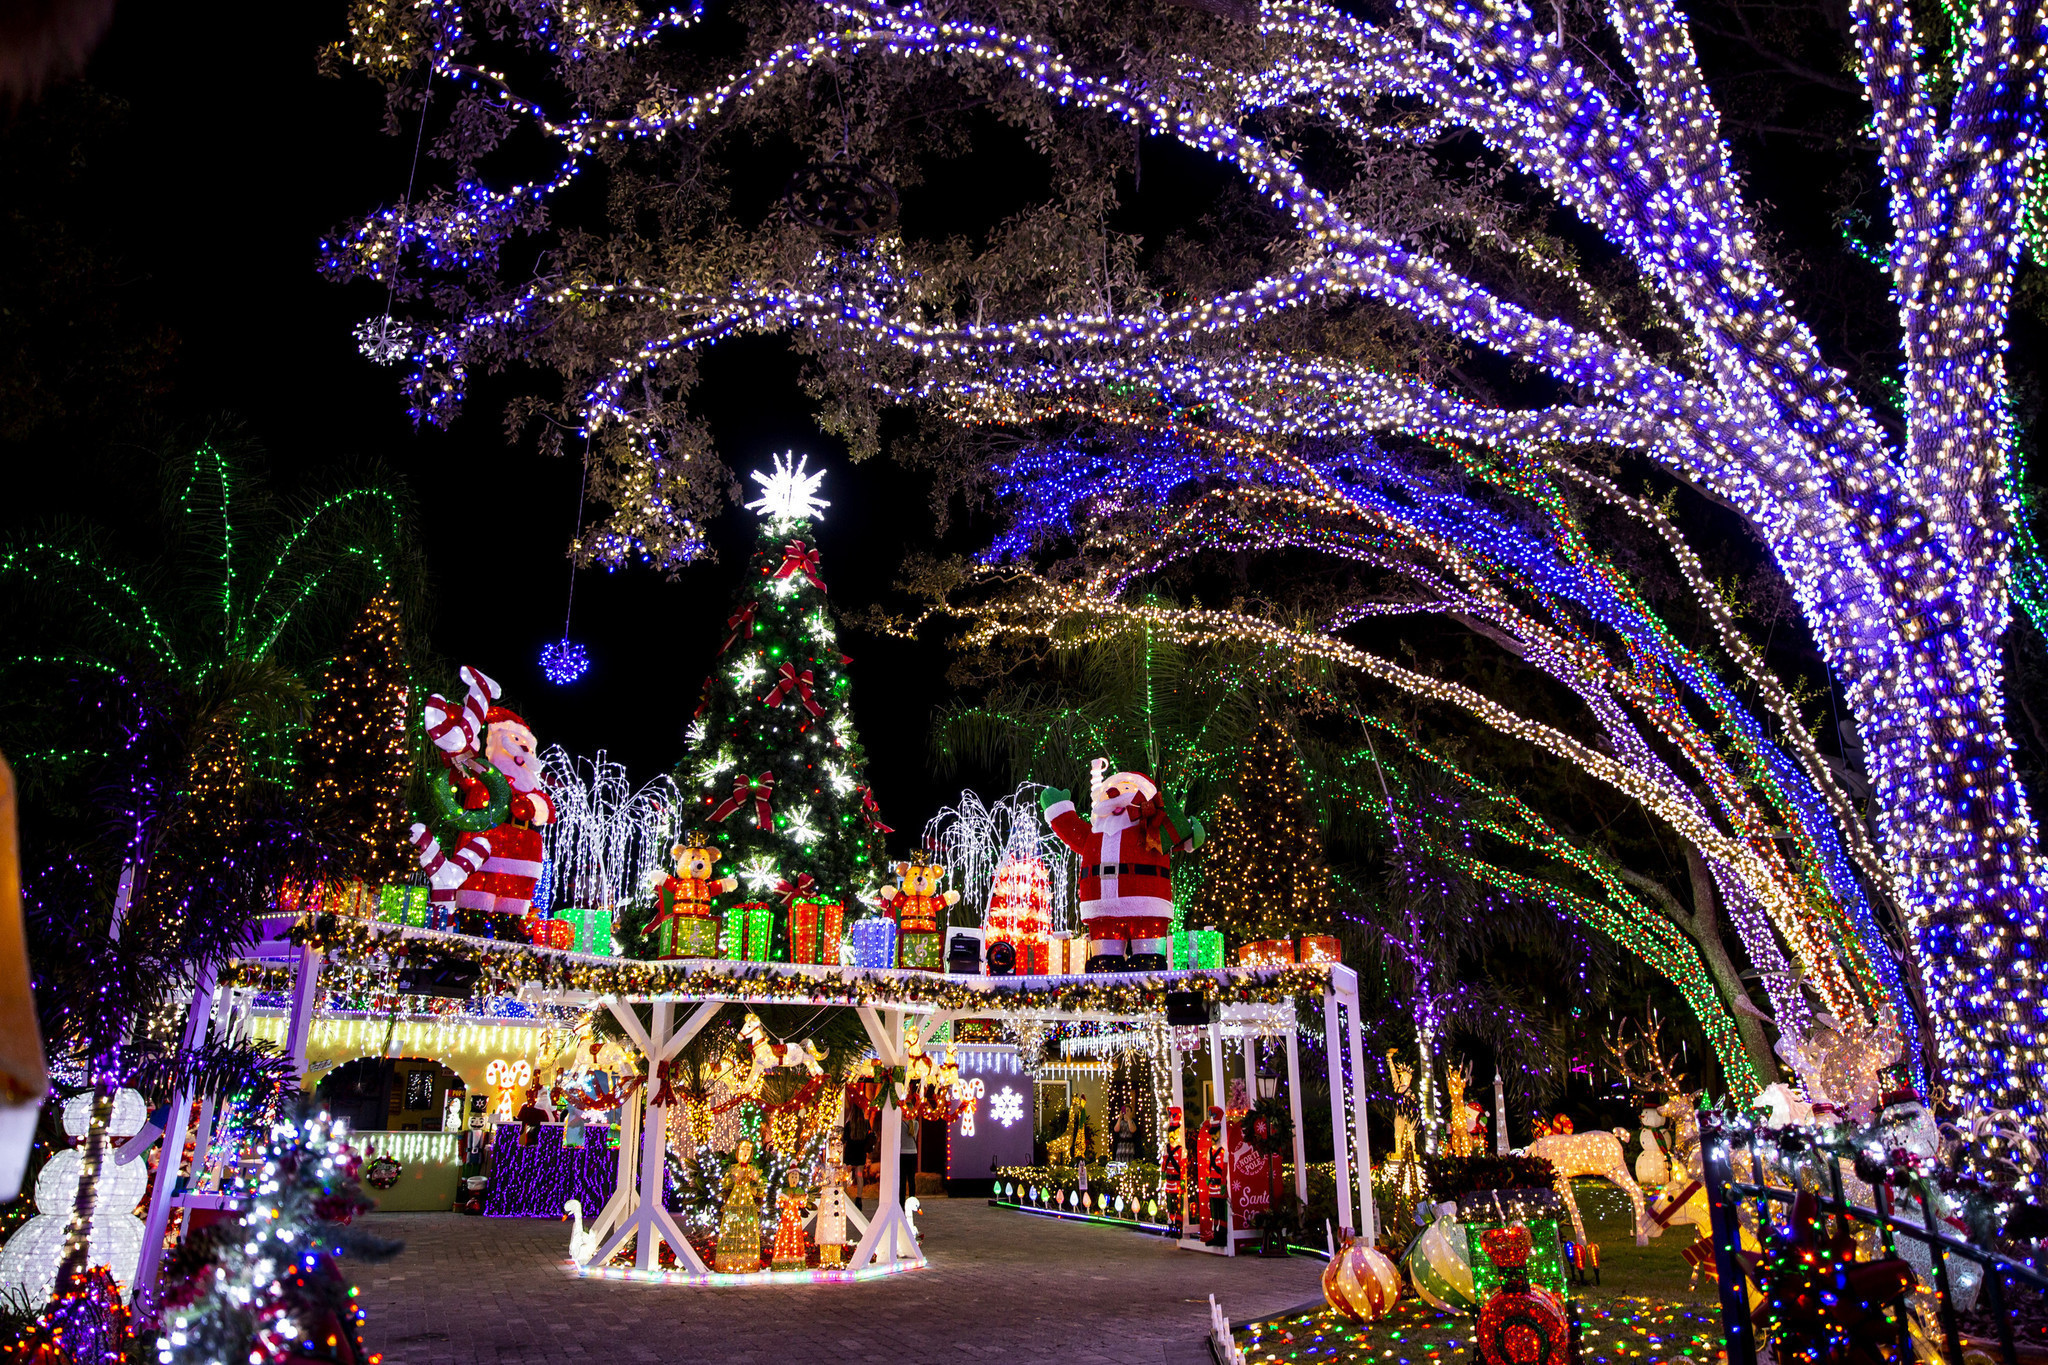 How to celebrate this holiday season in Savannah